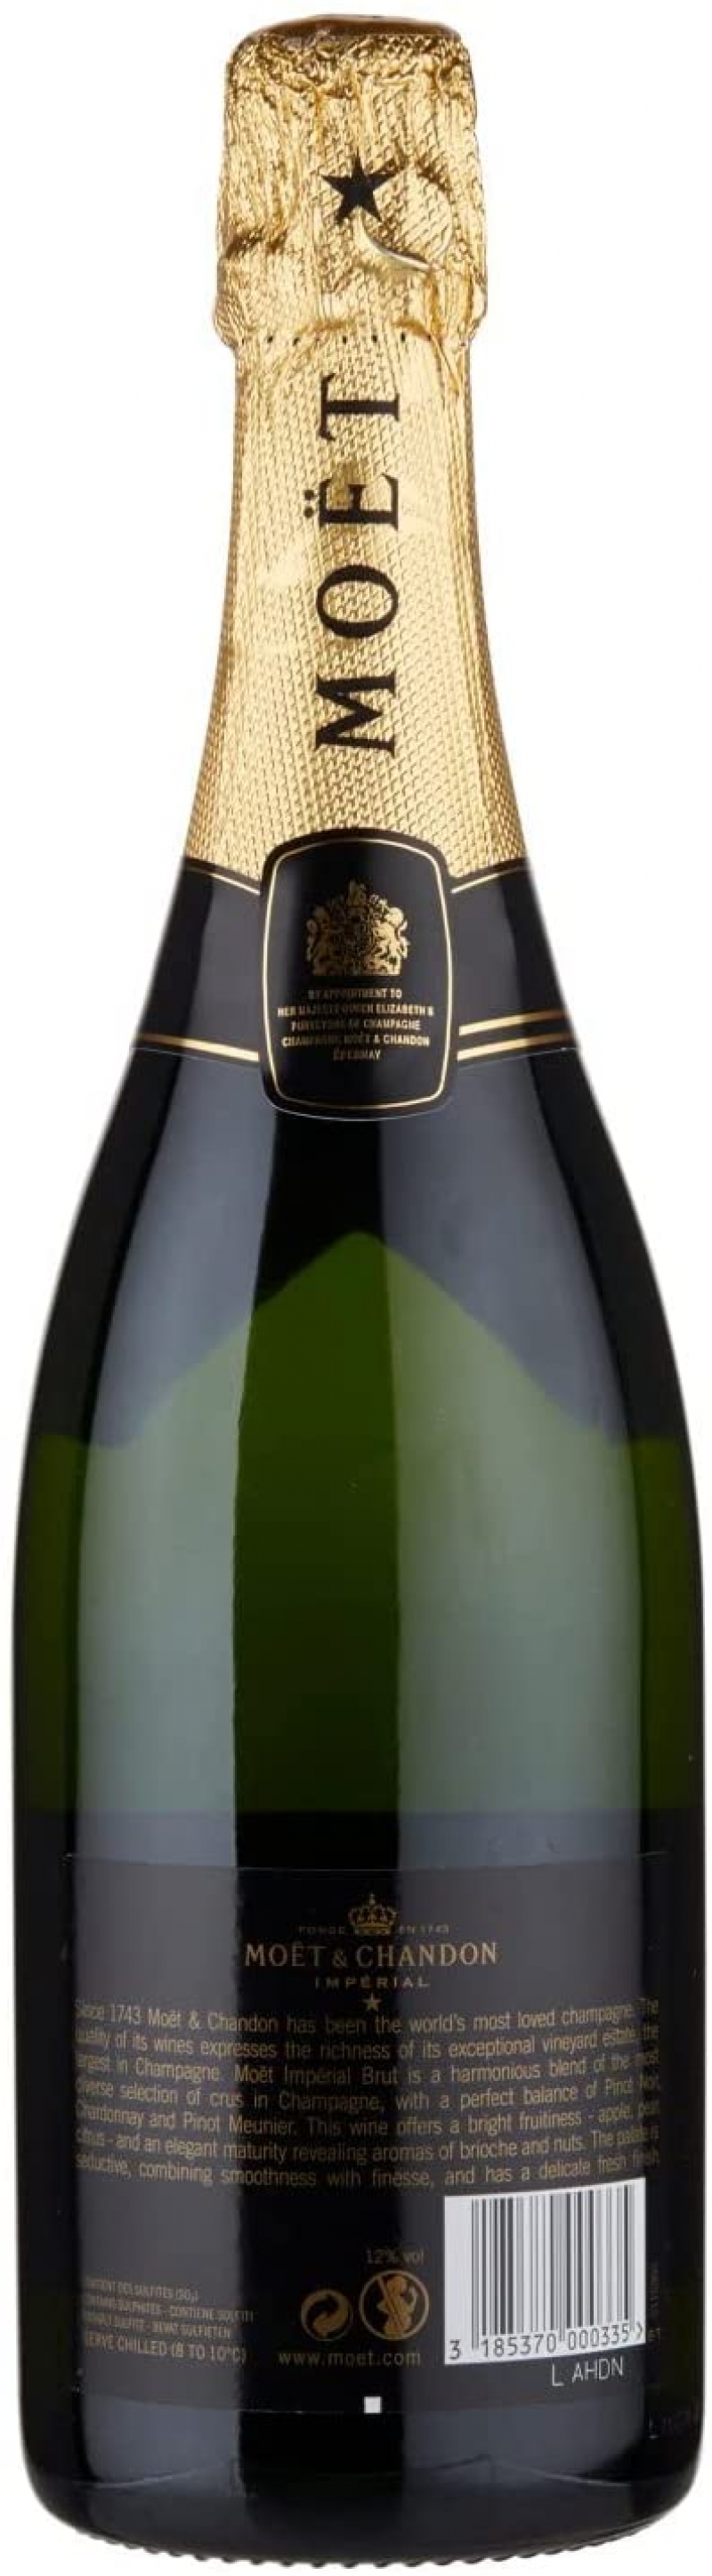 MOET & CHANDON Champagne Imperial 75 cl.